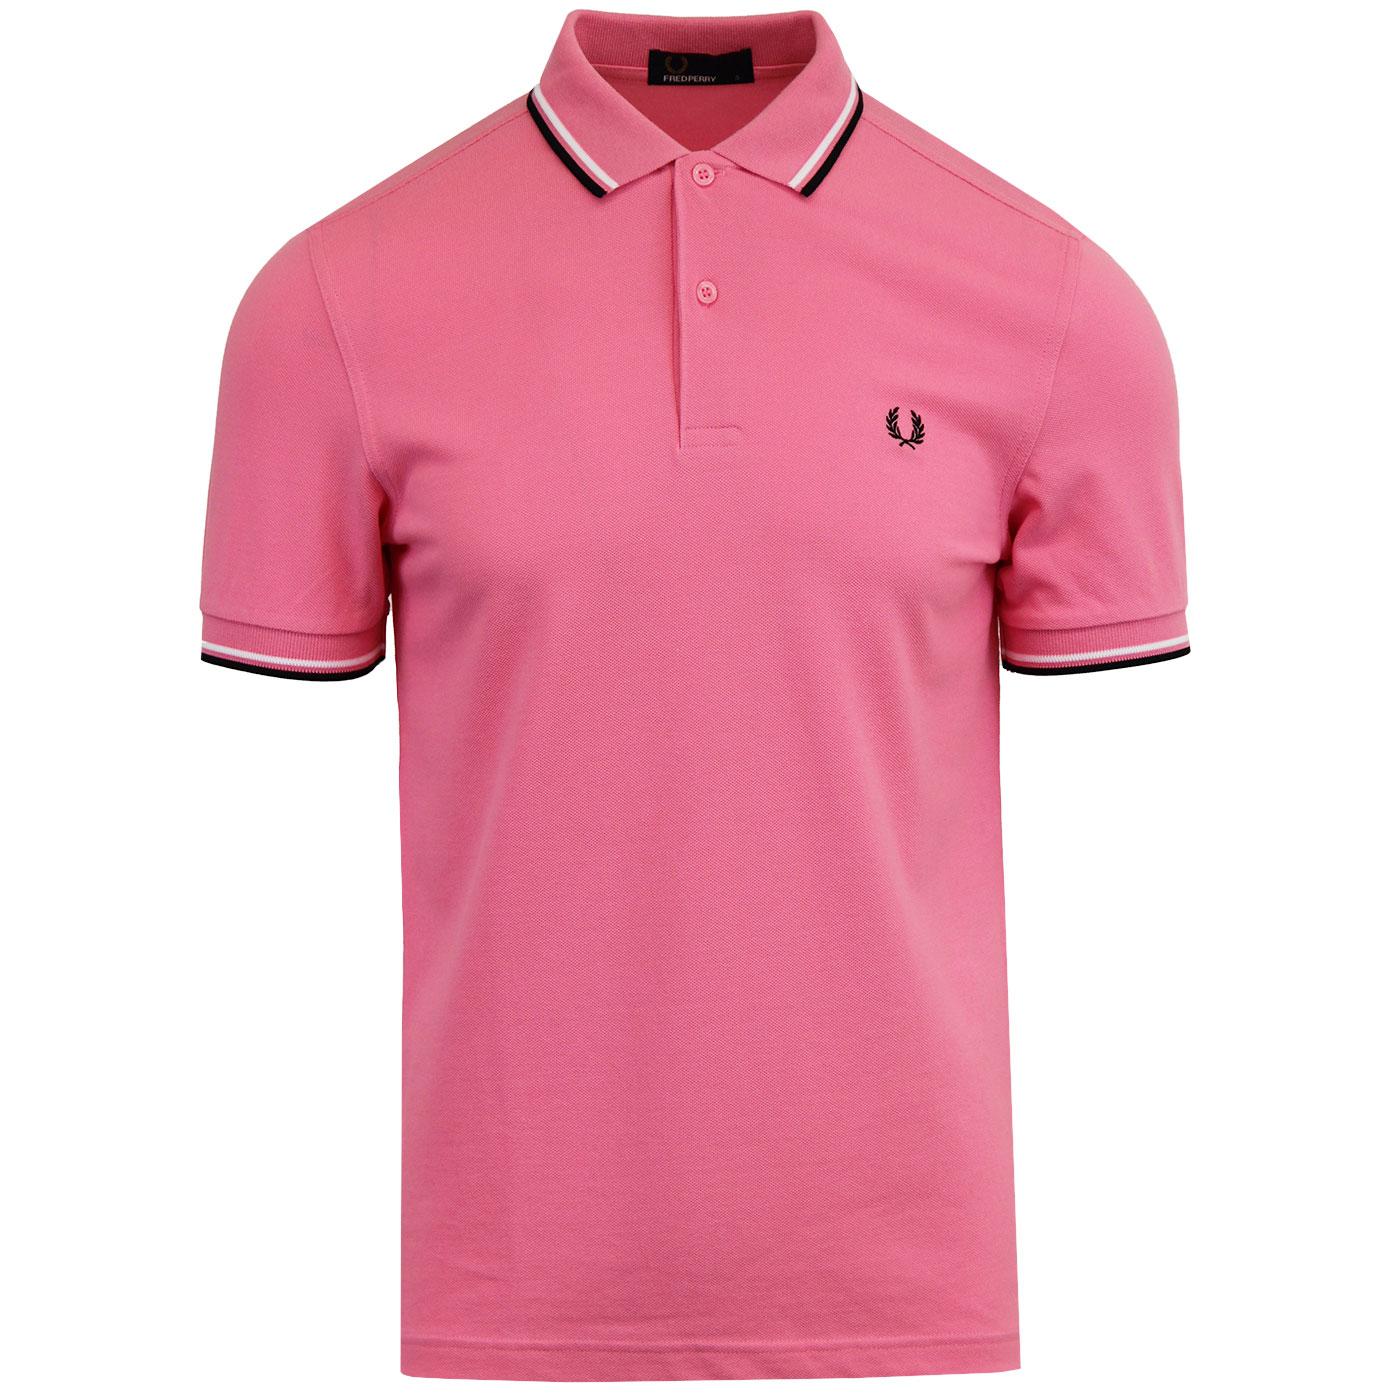 FRED PERRY M3600 Men's Twin Tipped Polo Top BP